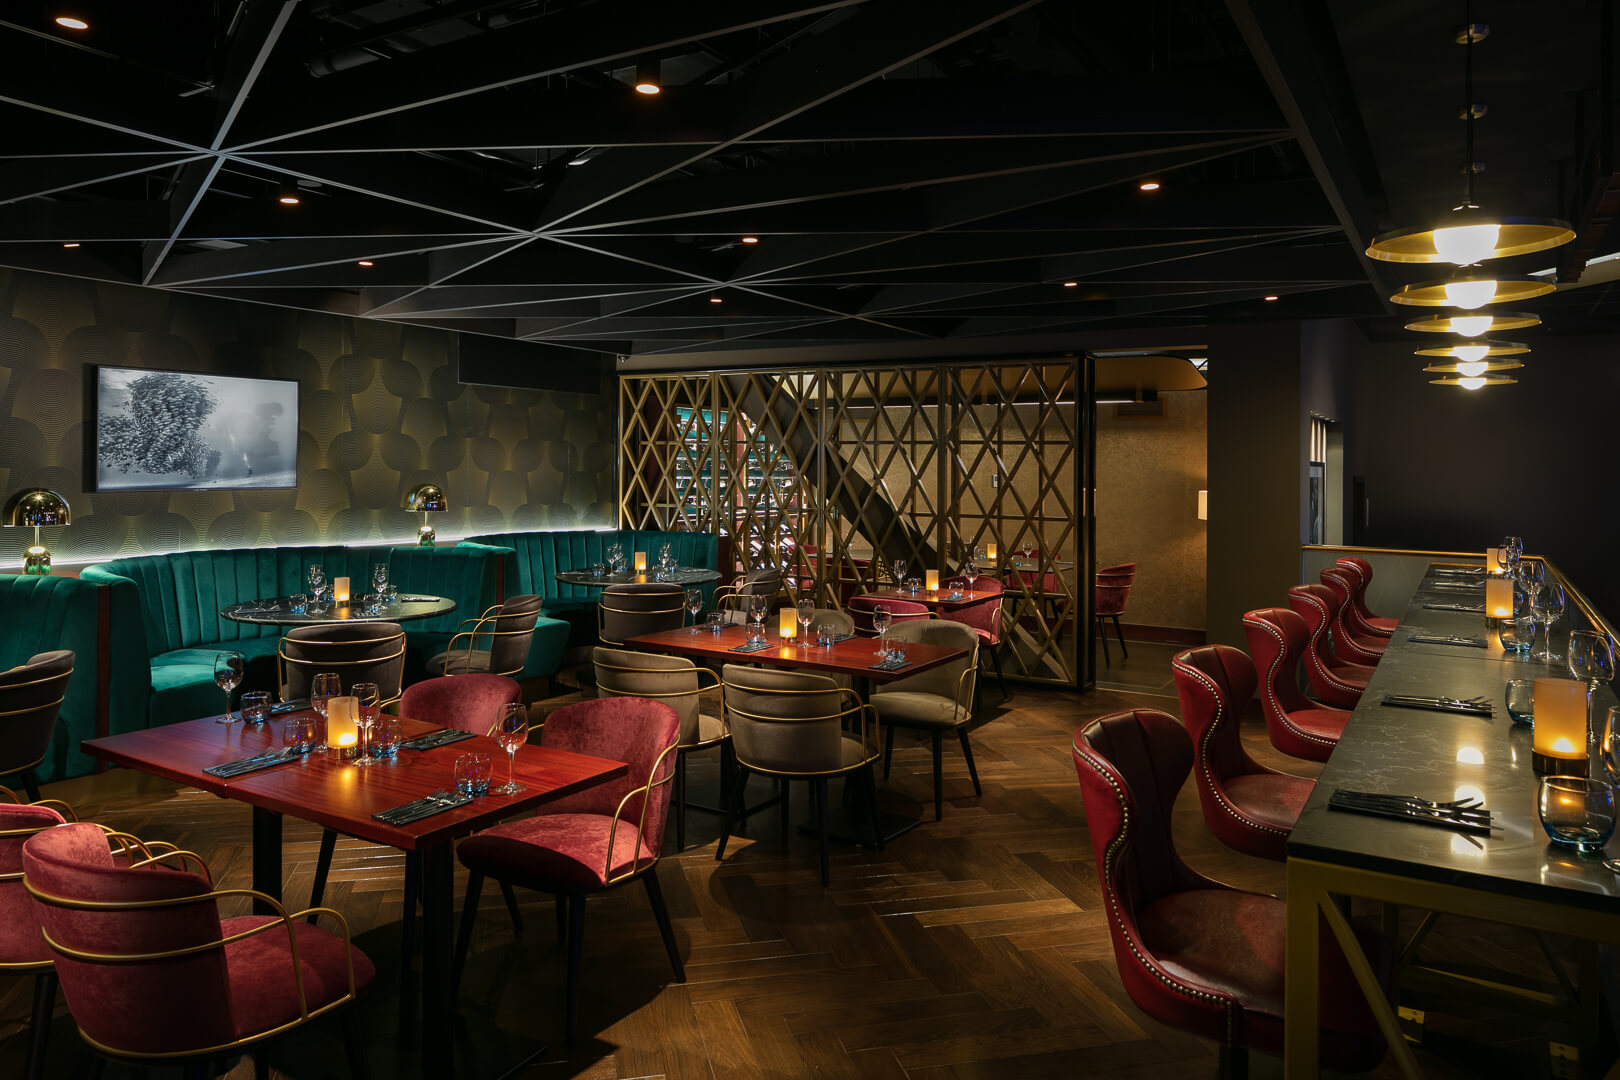 Architectural & Interior photography - Napoleons Casino and restaurant, Manchester. Photographed for Chapman Taylor Architects